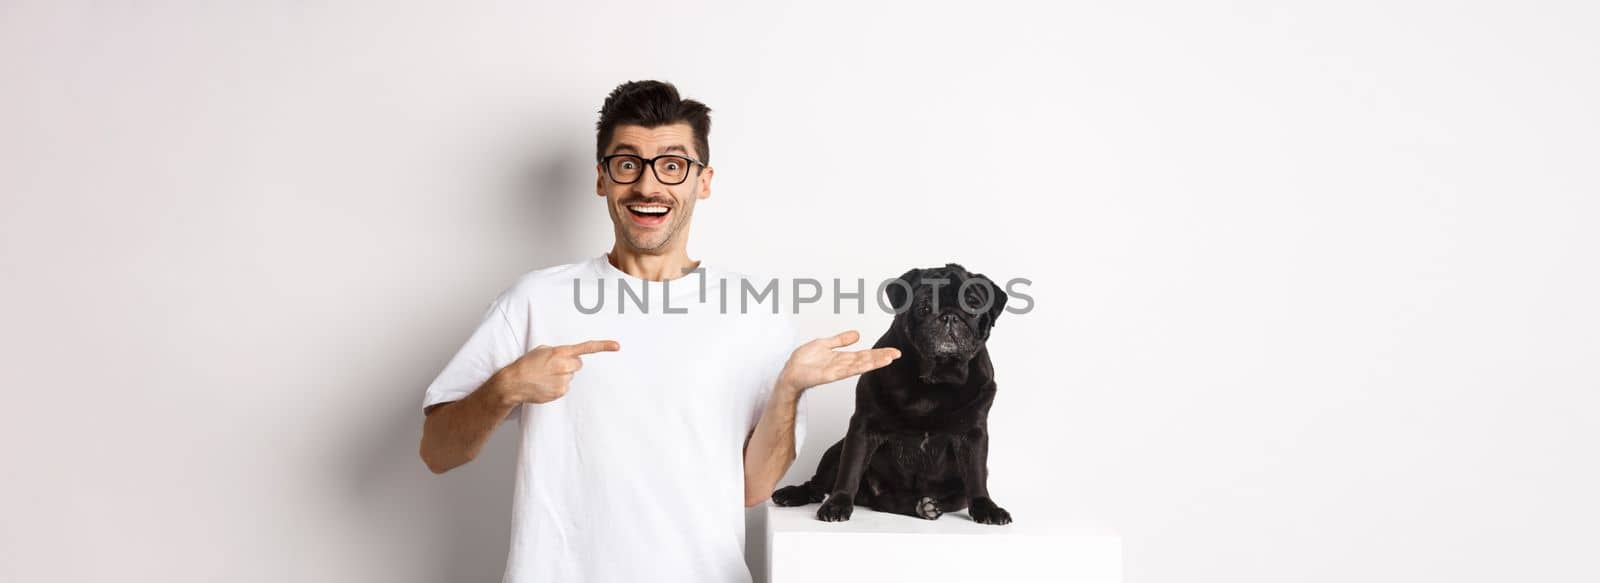 Cheerful young man pointing finger at his dog, showing small cute black pug sitting, white background.